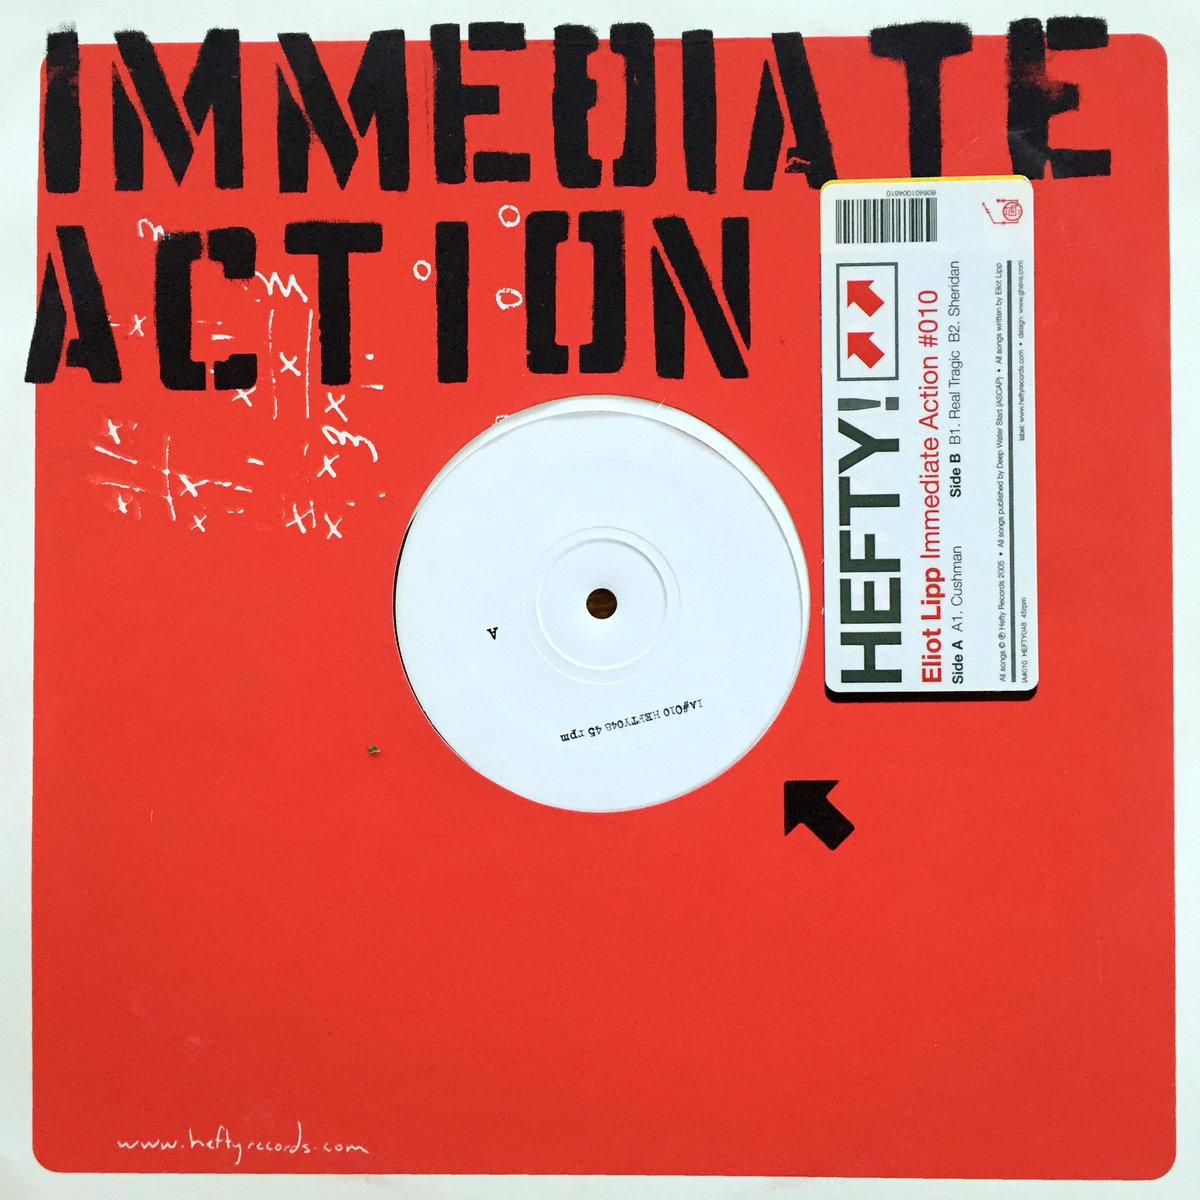 V.A. – Immediate Action